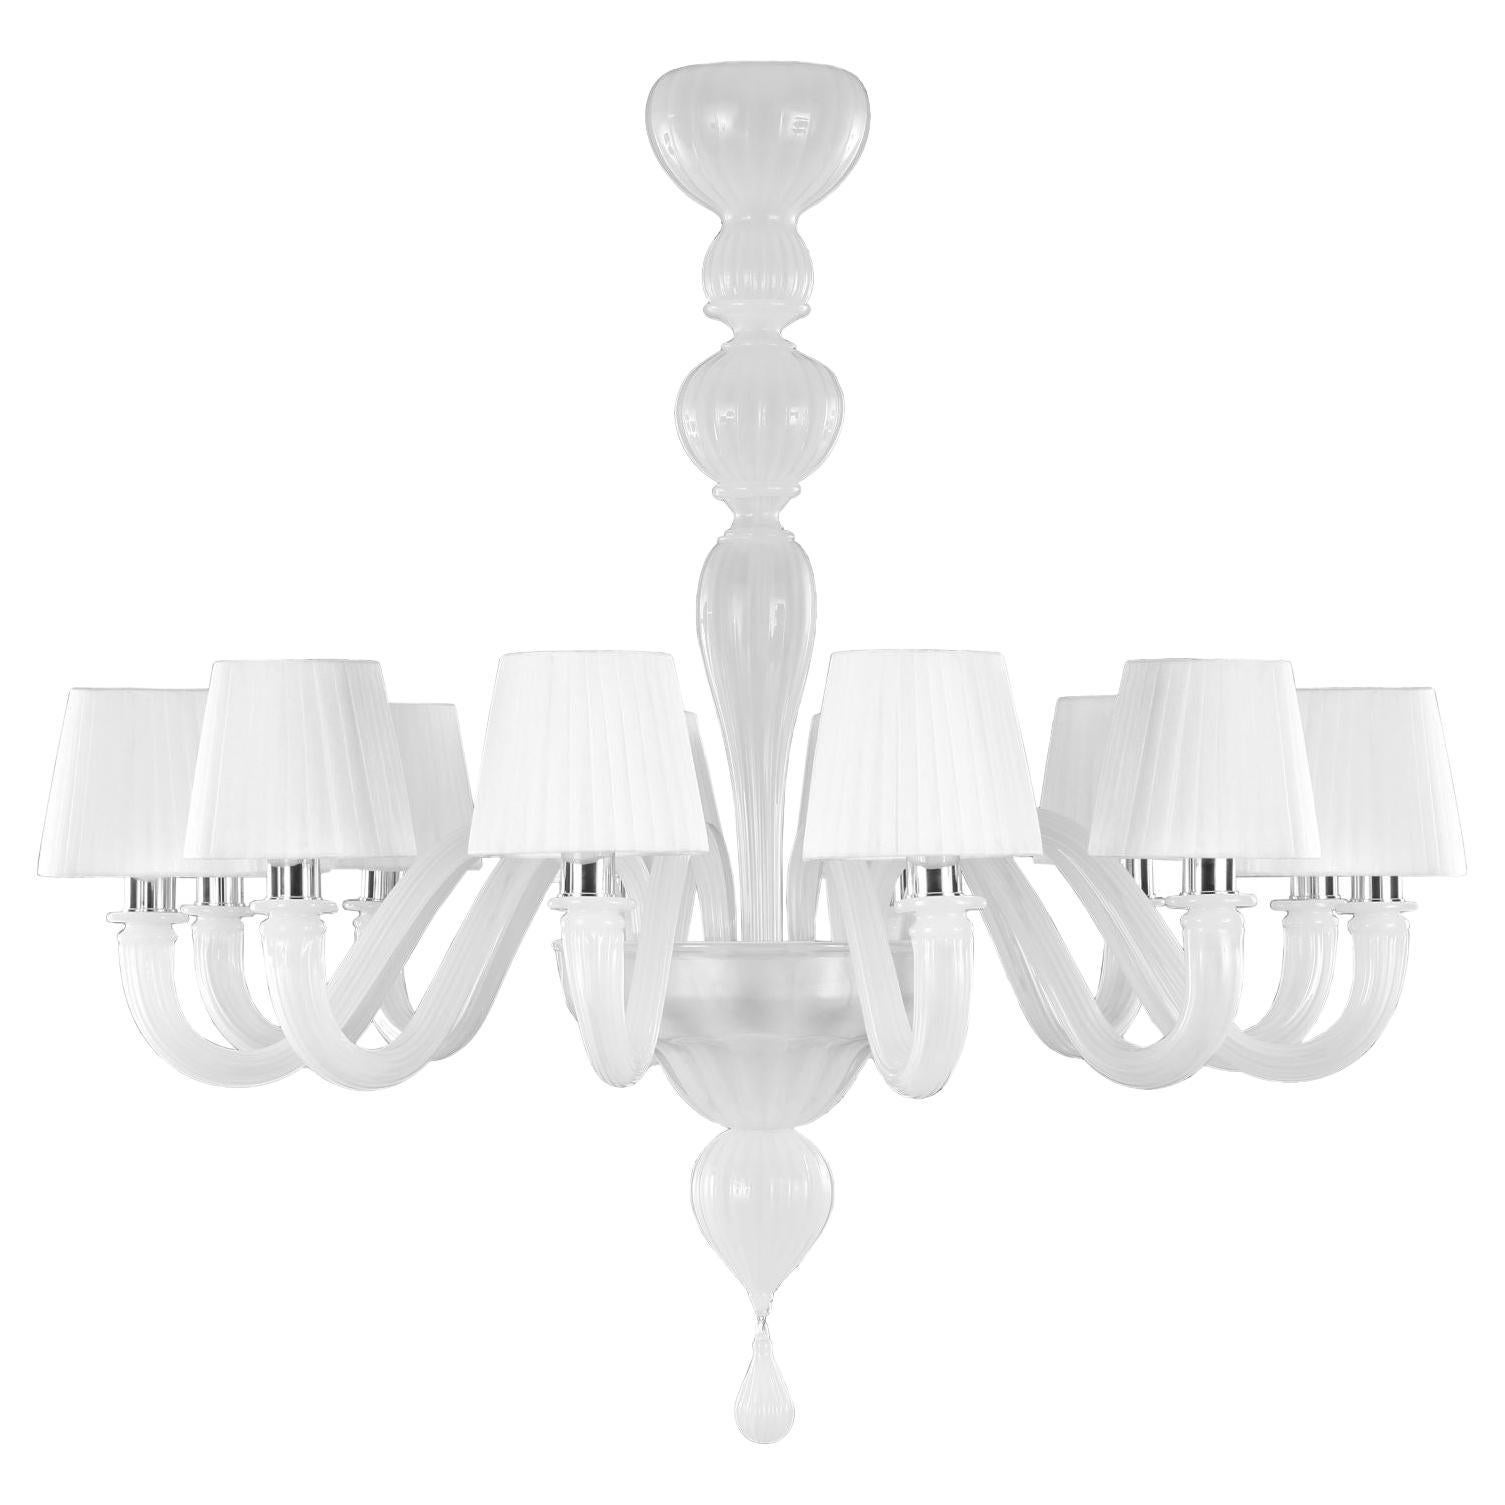 Chandelier 12 Arms White Silk Murano Glass White Lampshade Chapeau by Multiforme